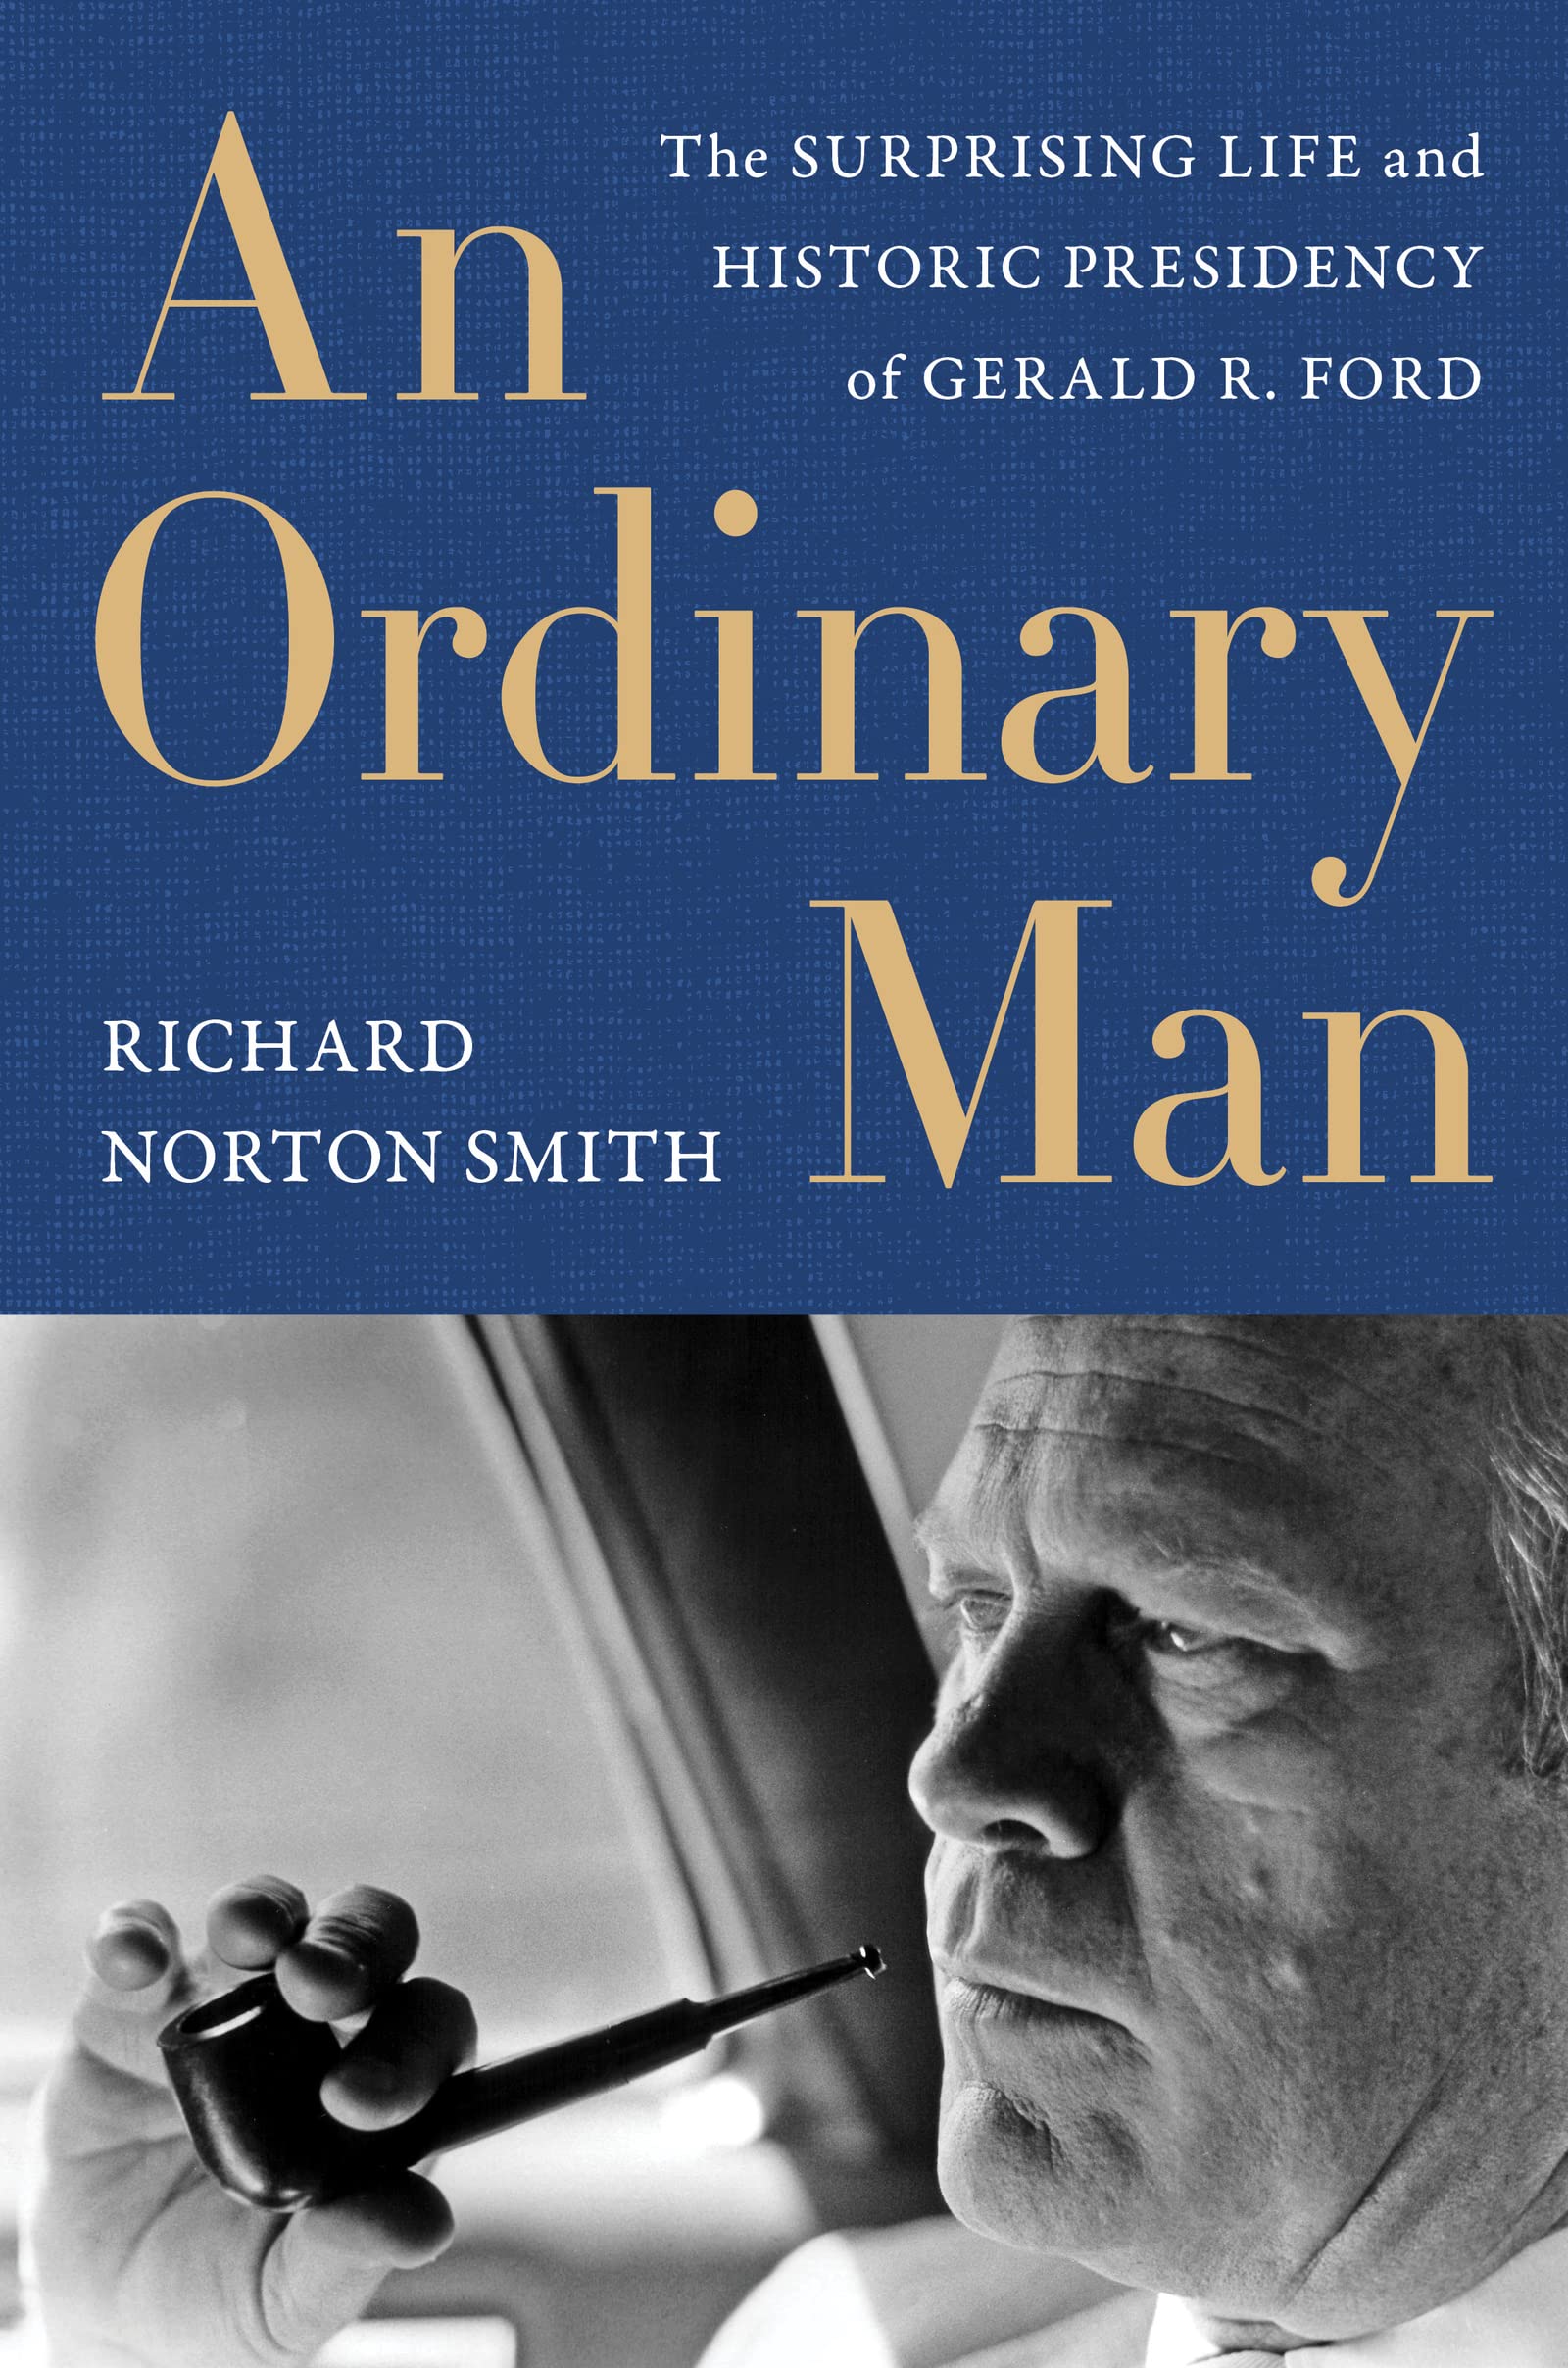 Pre-Order An Ordinary Man Autographed by Richard Norton Smith